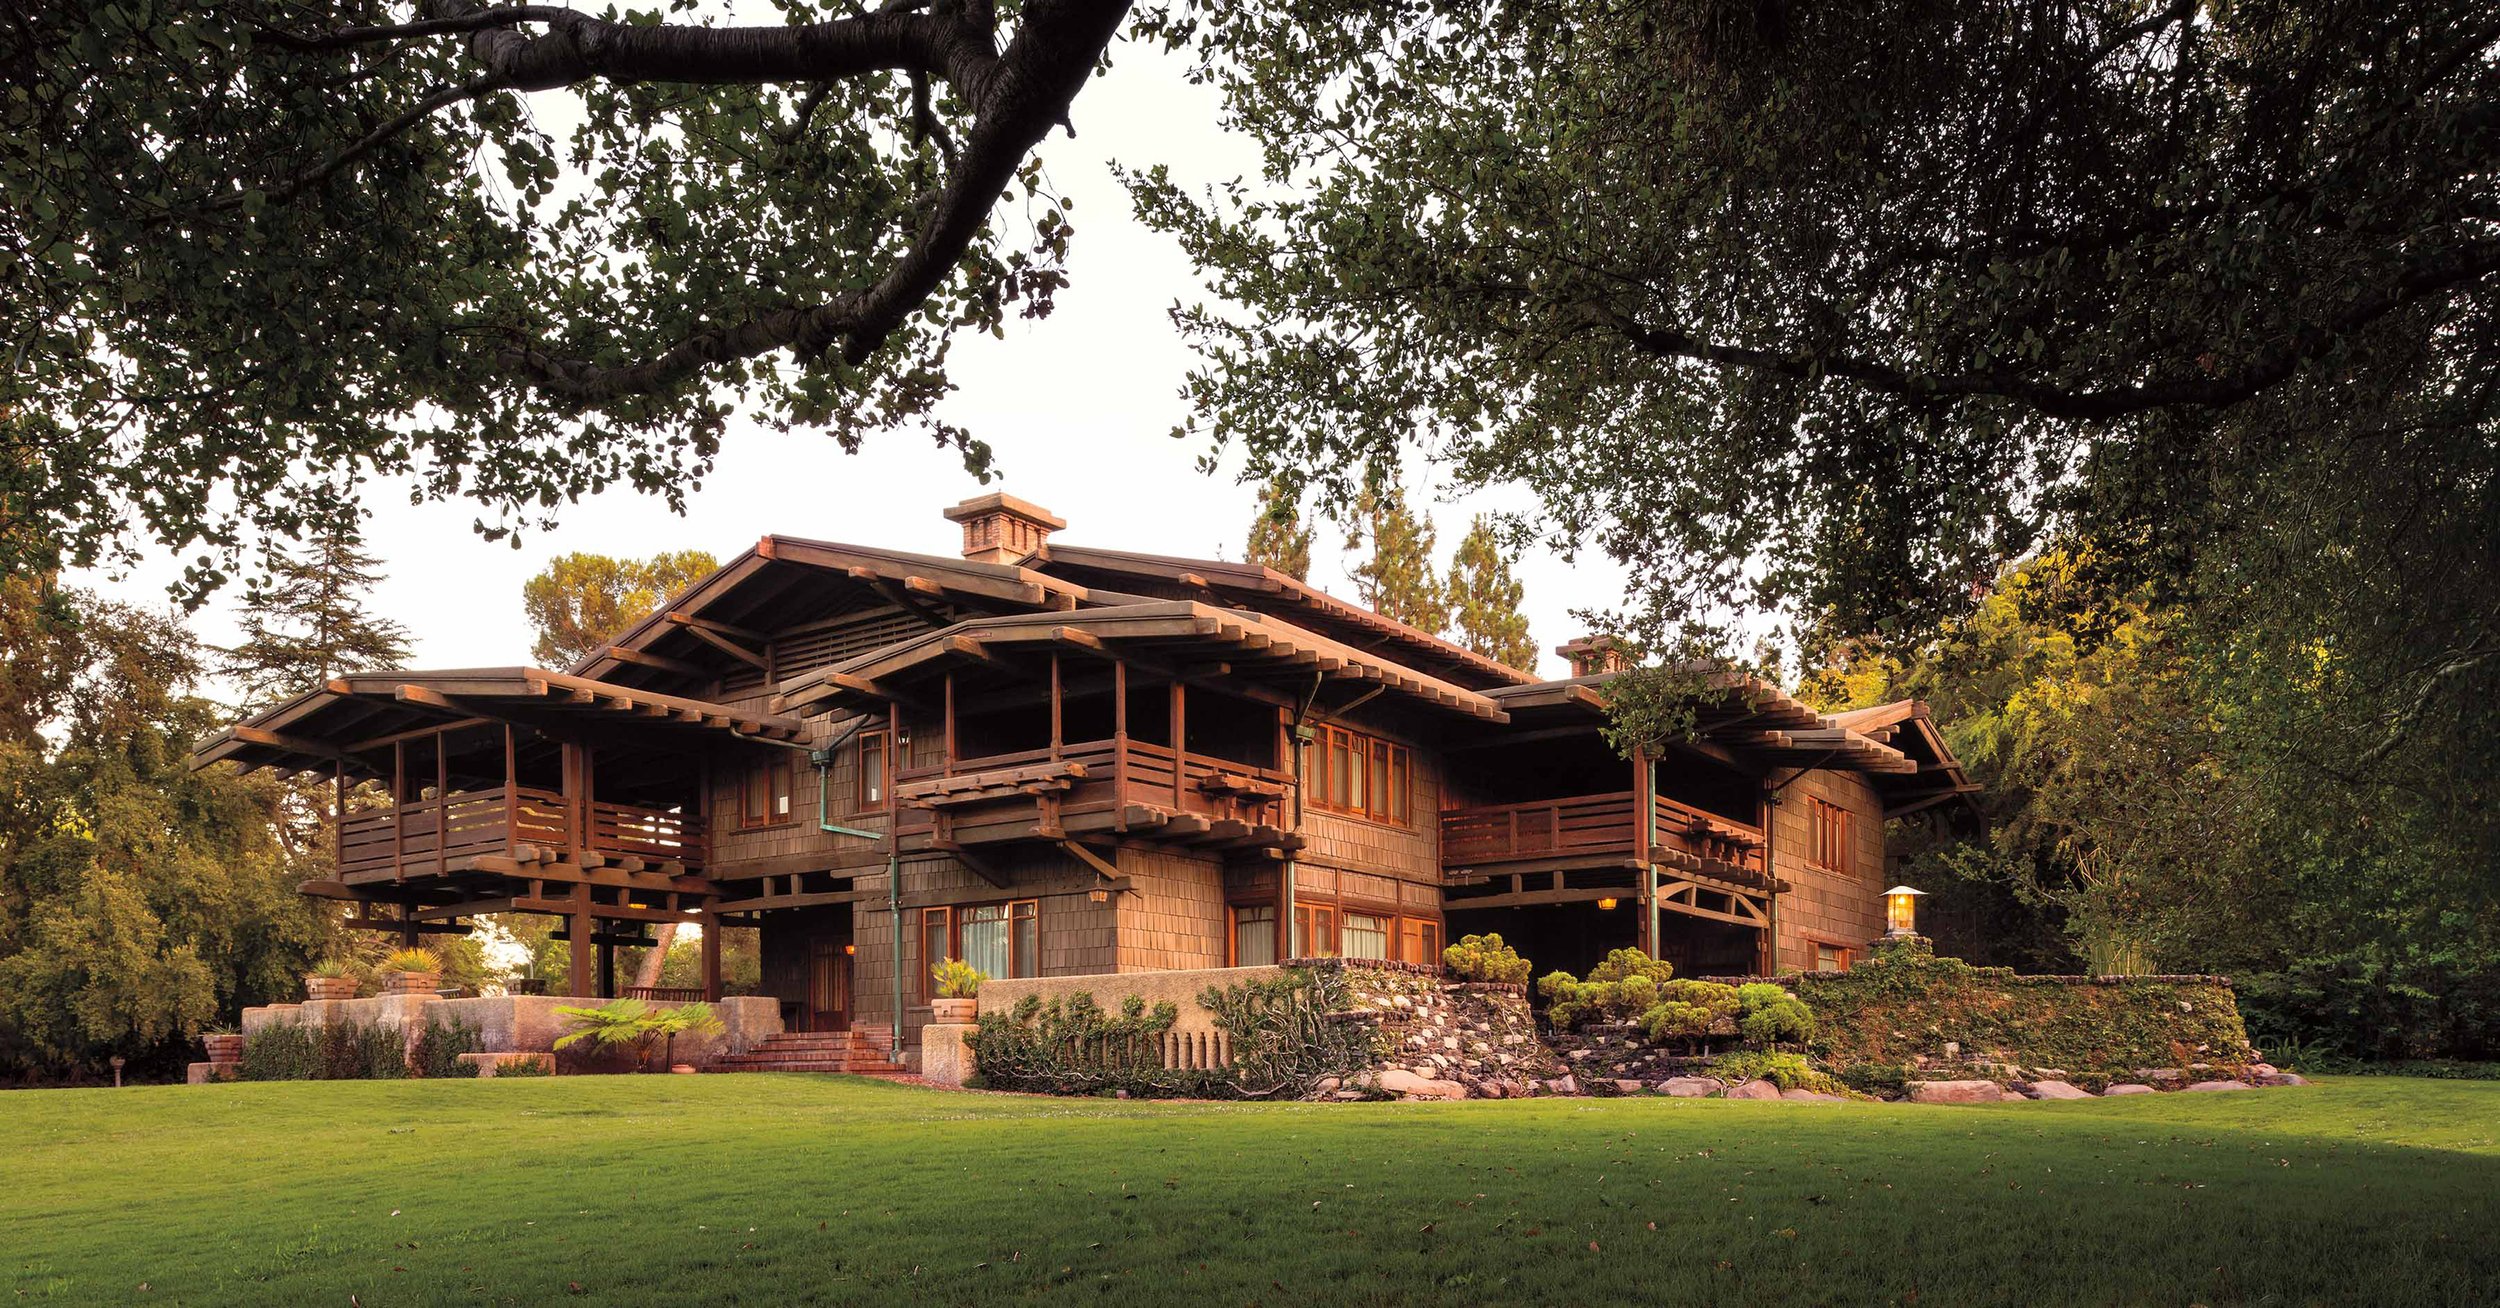 The Gamble House Looks to the Future of Historic House Museums (Metropolis)